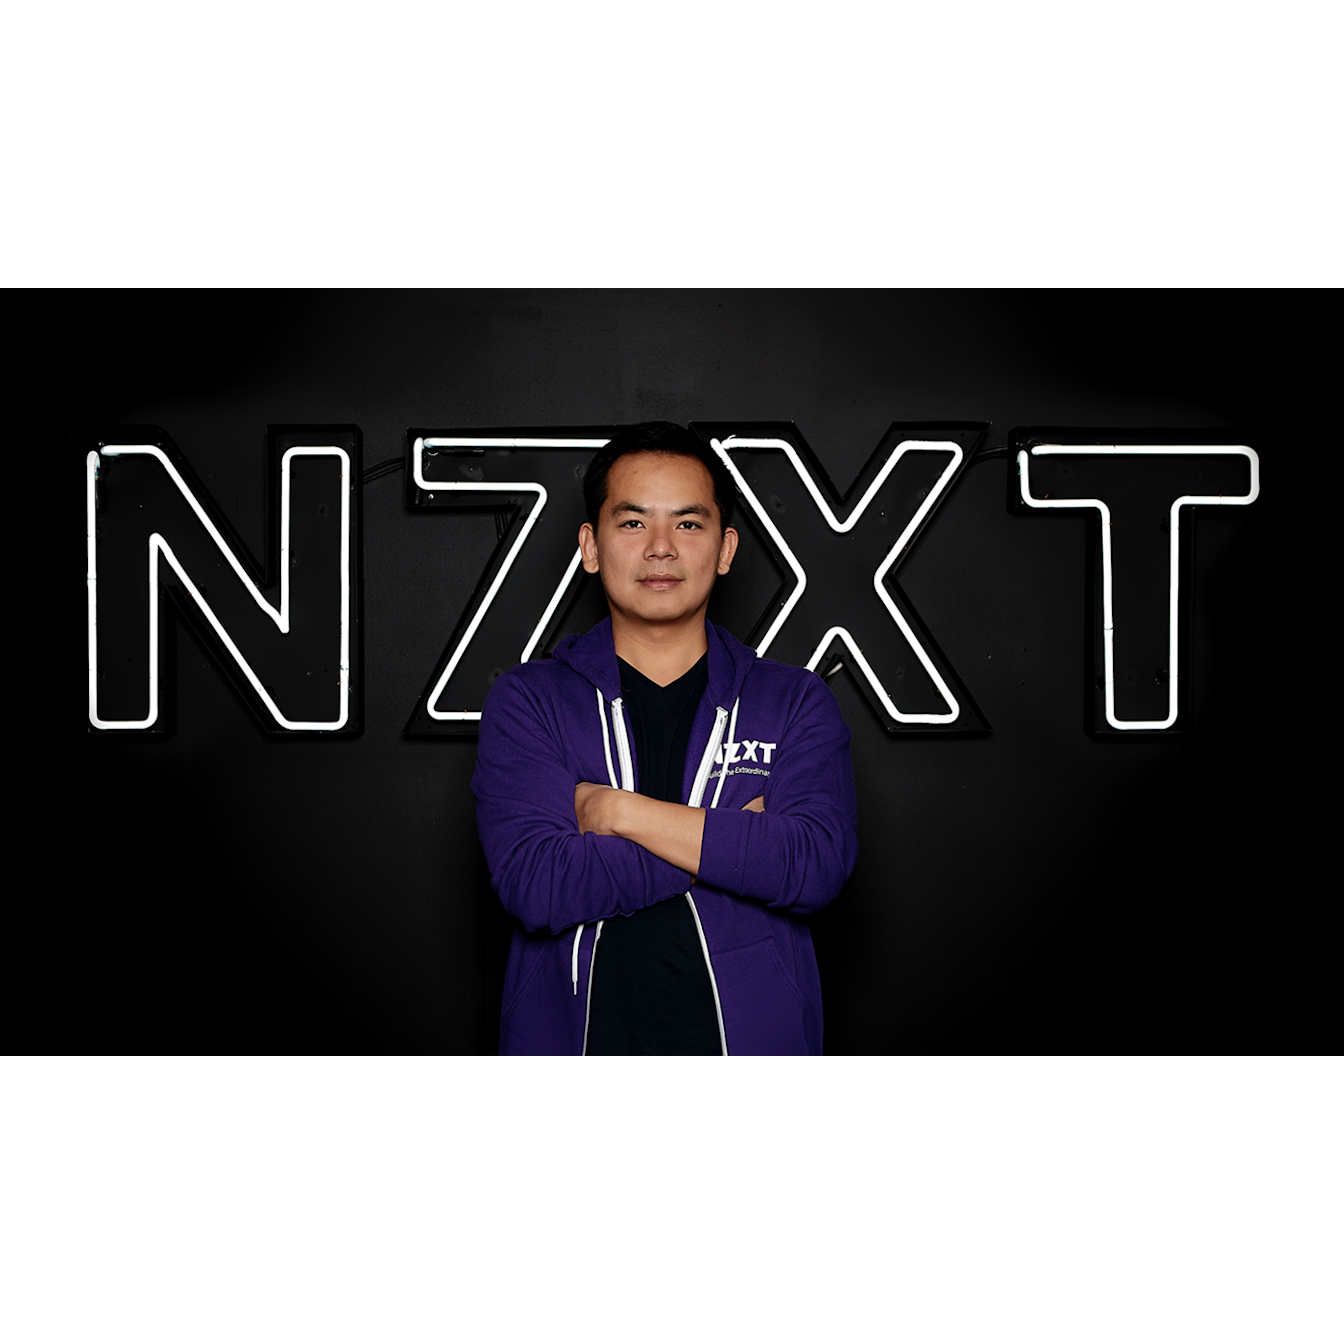 NZXT Founder